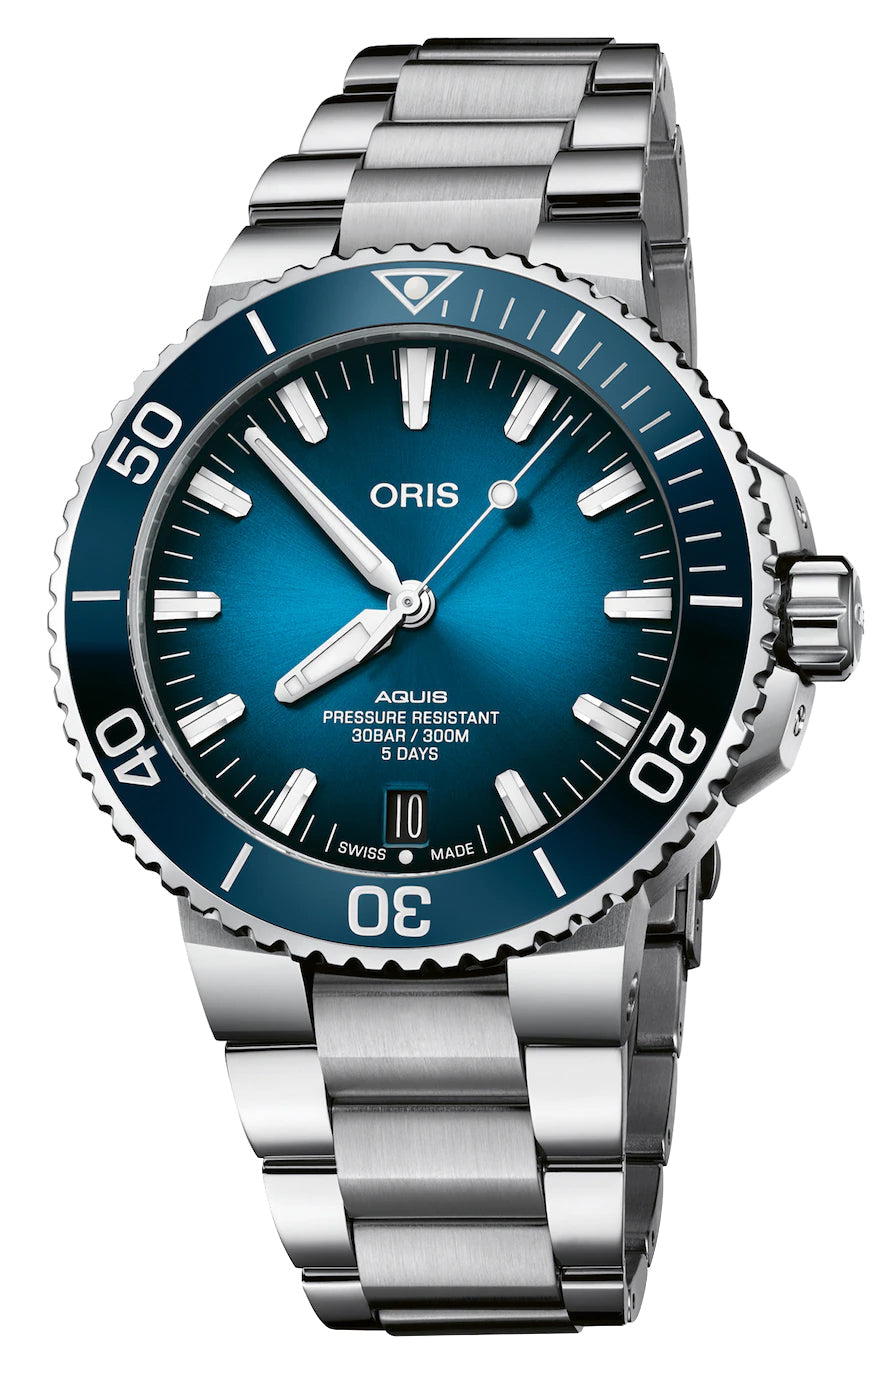 update alt-text with template Watches - Mens-Oris-400 7763 4135-MB-40 - 45 mm, Aquis, blue, date, divers, mens, menswatches, new arrivals, Oris, round, rpSKU_400 7769 4135-MB, rpSKU_400 7769 4154-MB, rpSKU_400 7769 4154-RS, rpSKU_400 7769 4157-MB, rpSKU_733 7707 4055-MB, stainless steel band, stainless steel case, swiss automatic, uni-directional rotating bezel, watches-Watches & Beyond